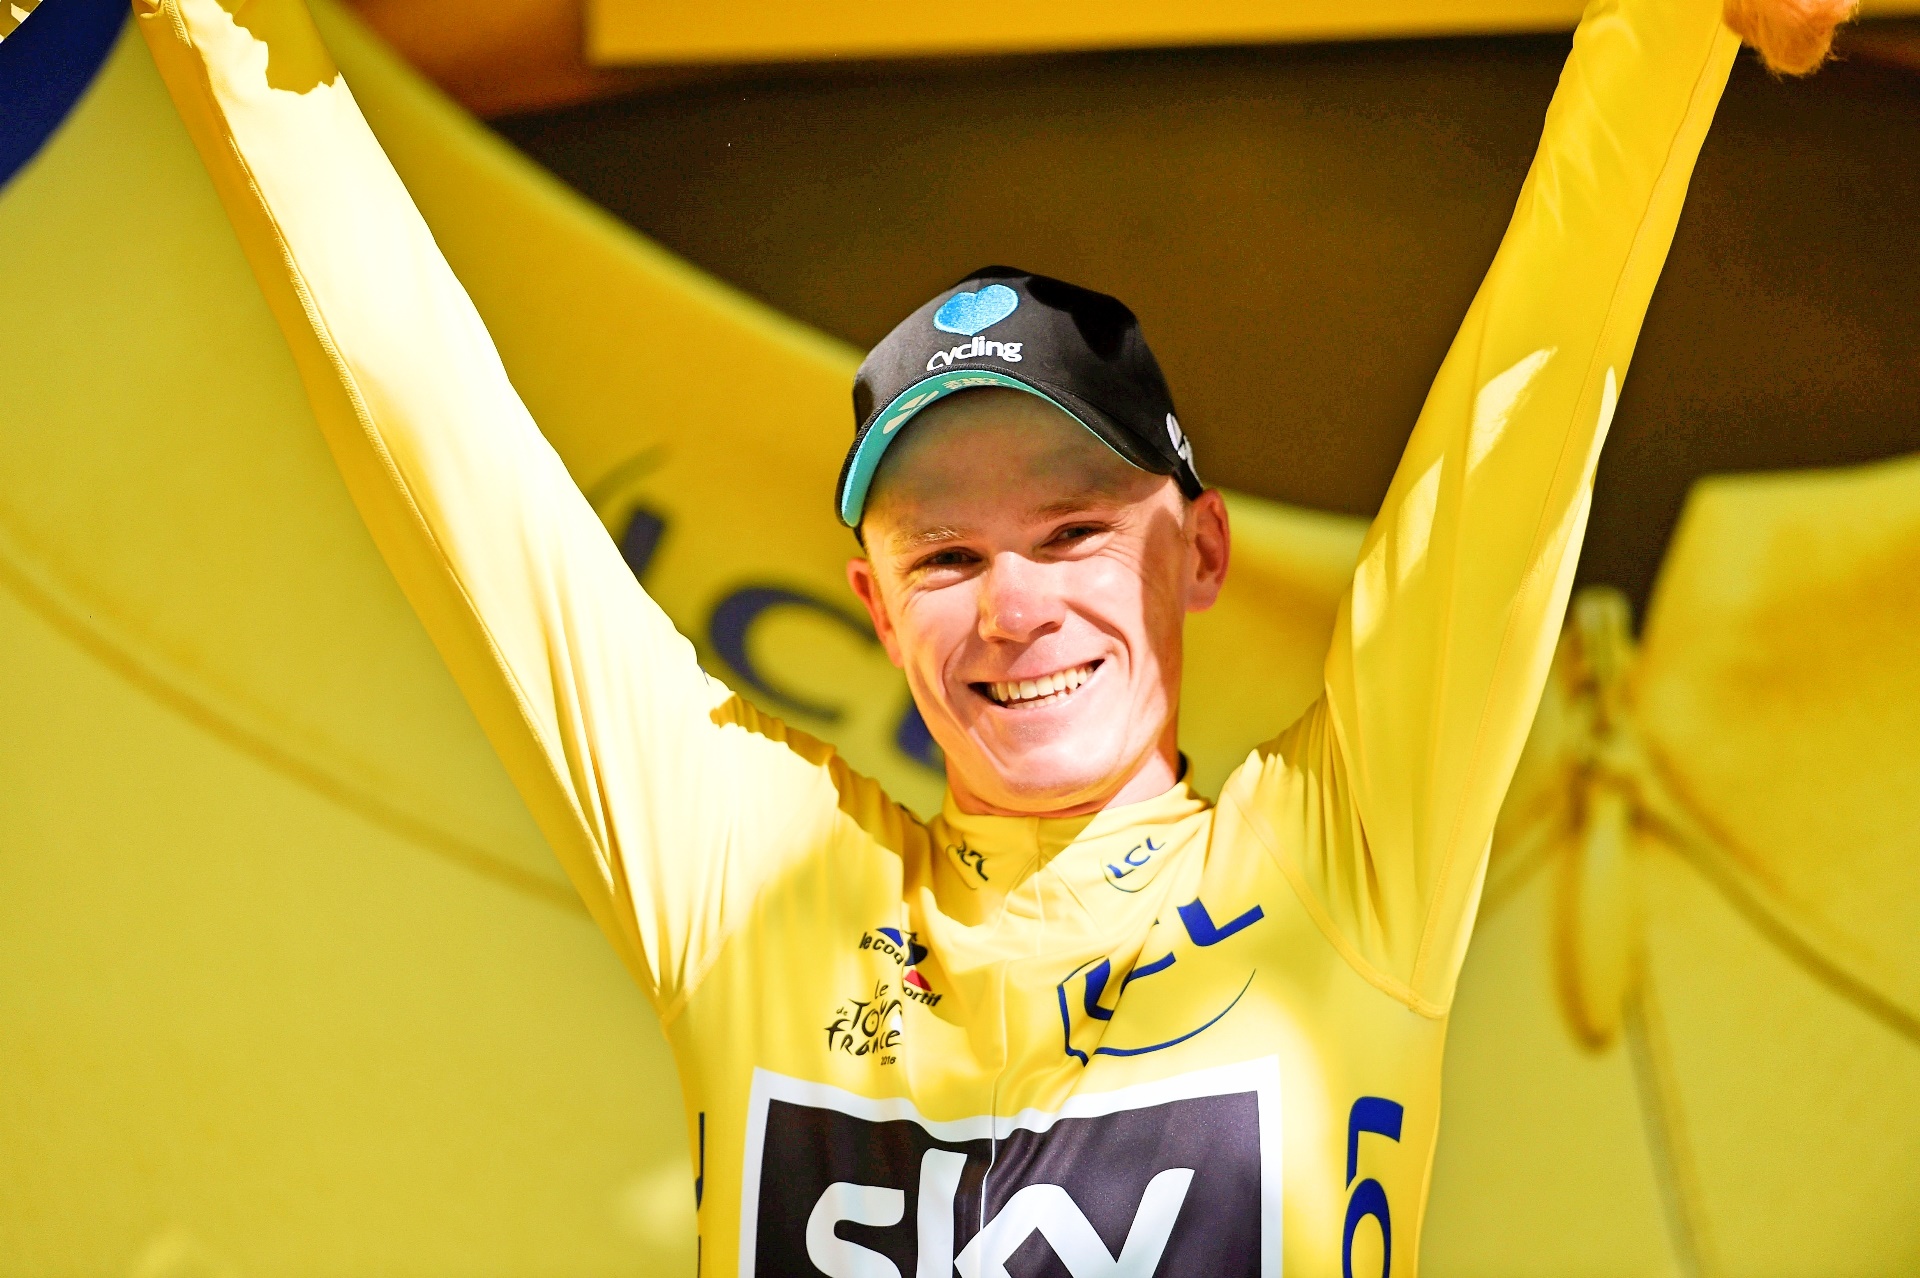 Chris-Froome-yellow-jersey-Team-Sky-podium-Tour-de-France-2016-stage-16-pic-Sirotti